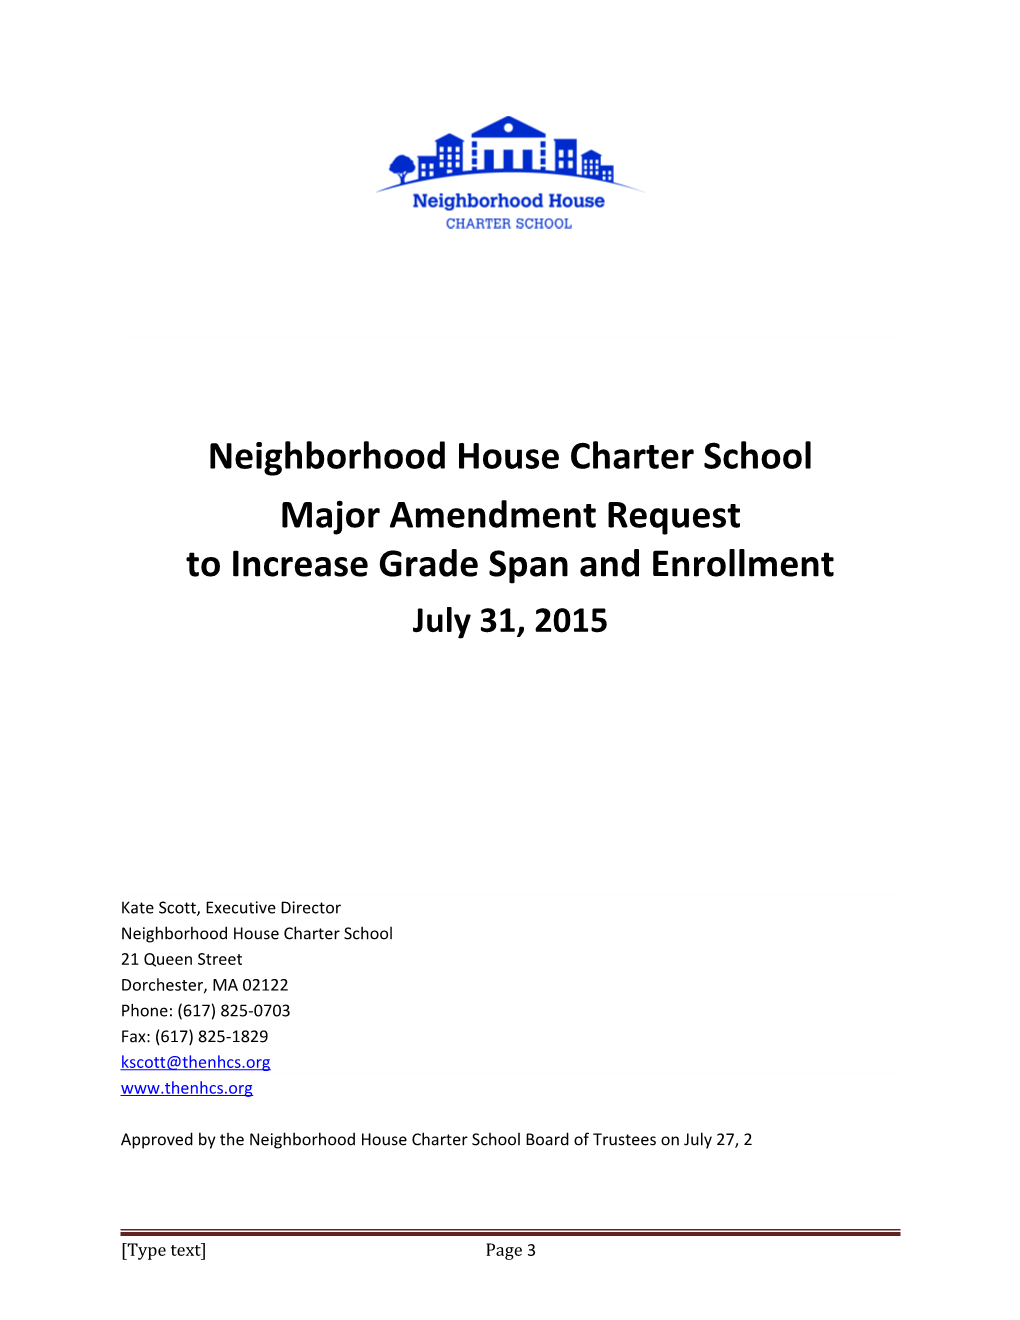 Neighborhood House Charter School Amendment Request to Add Grades and Increase Maximum